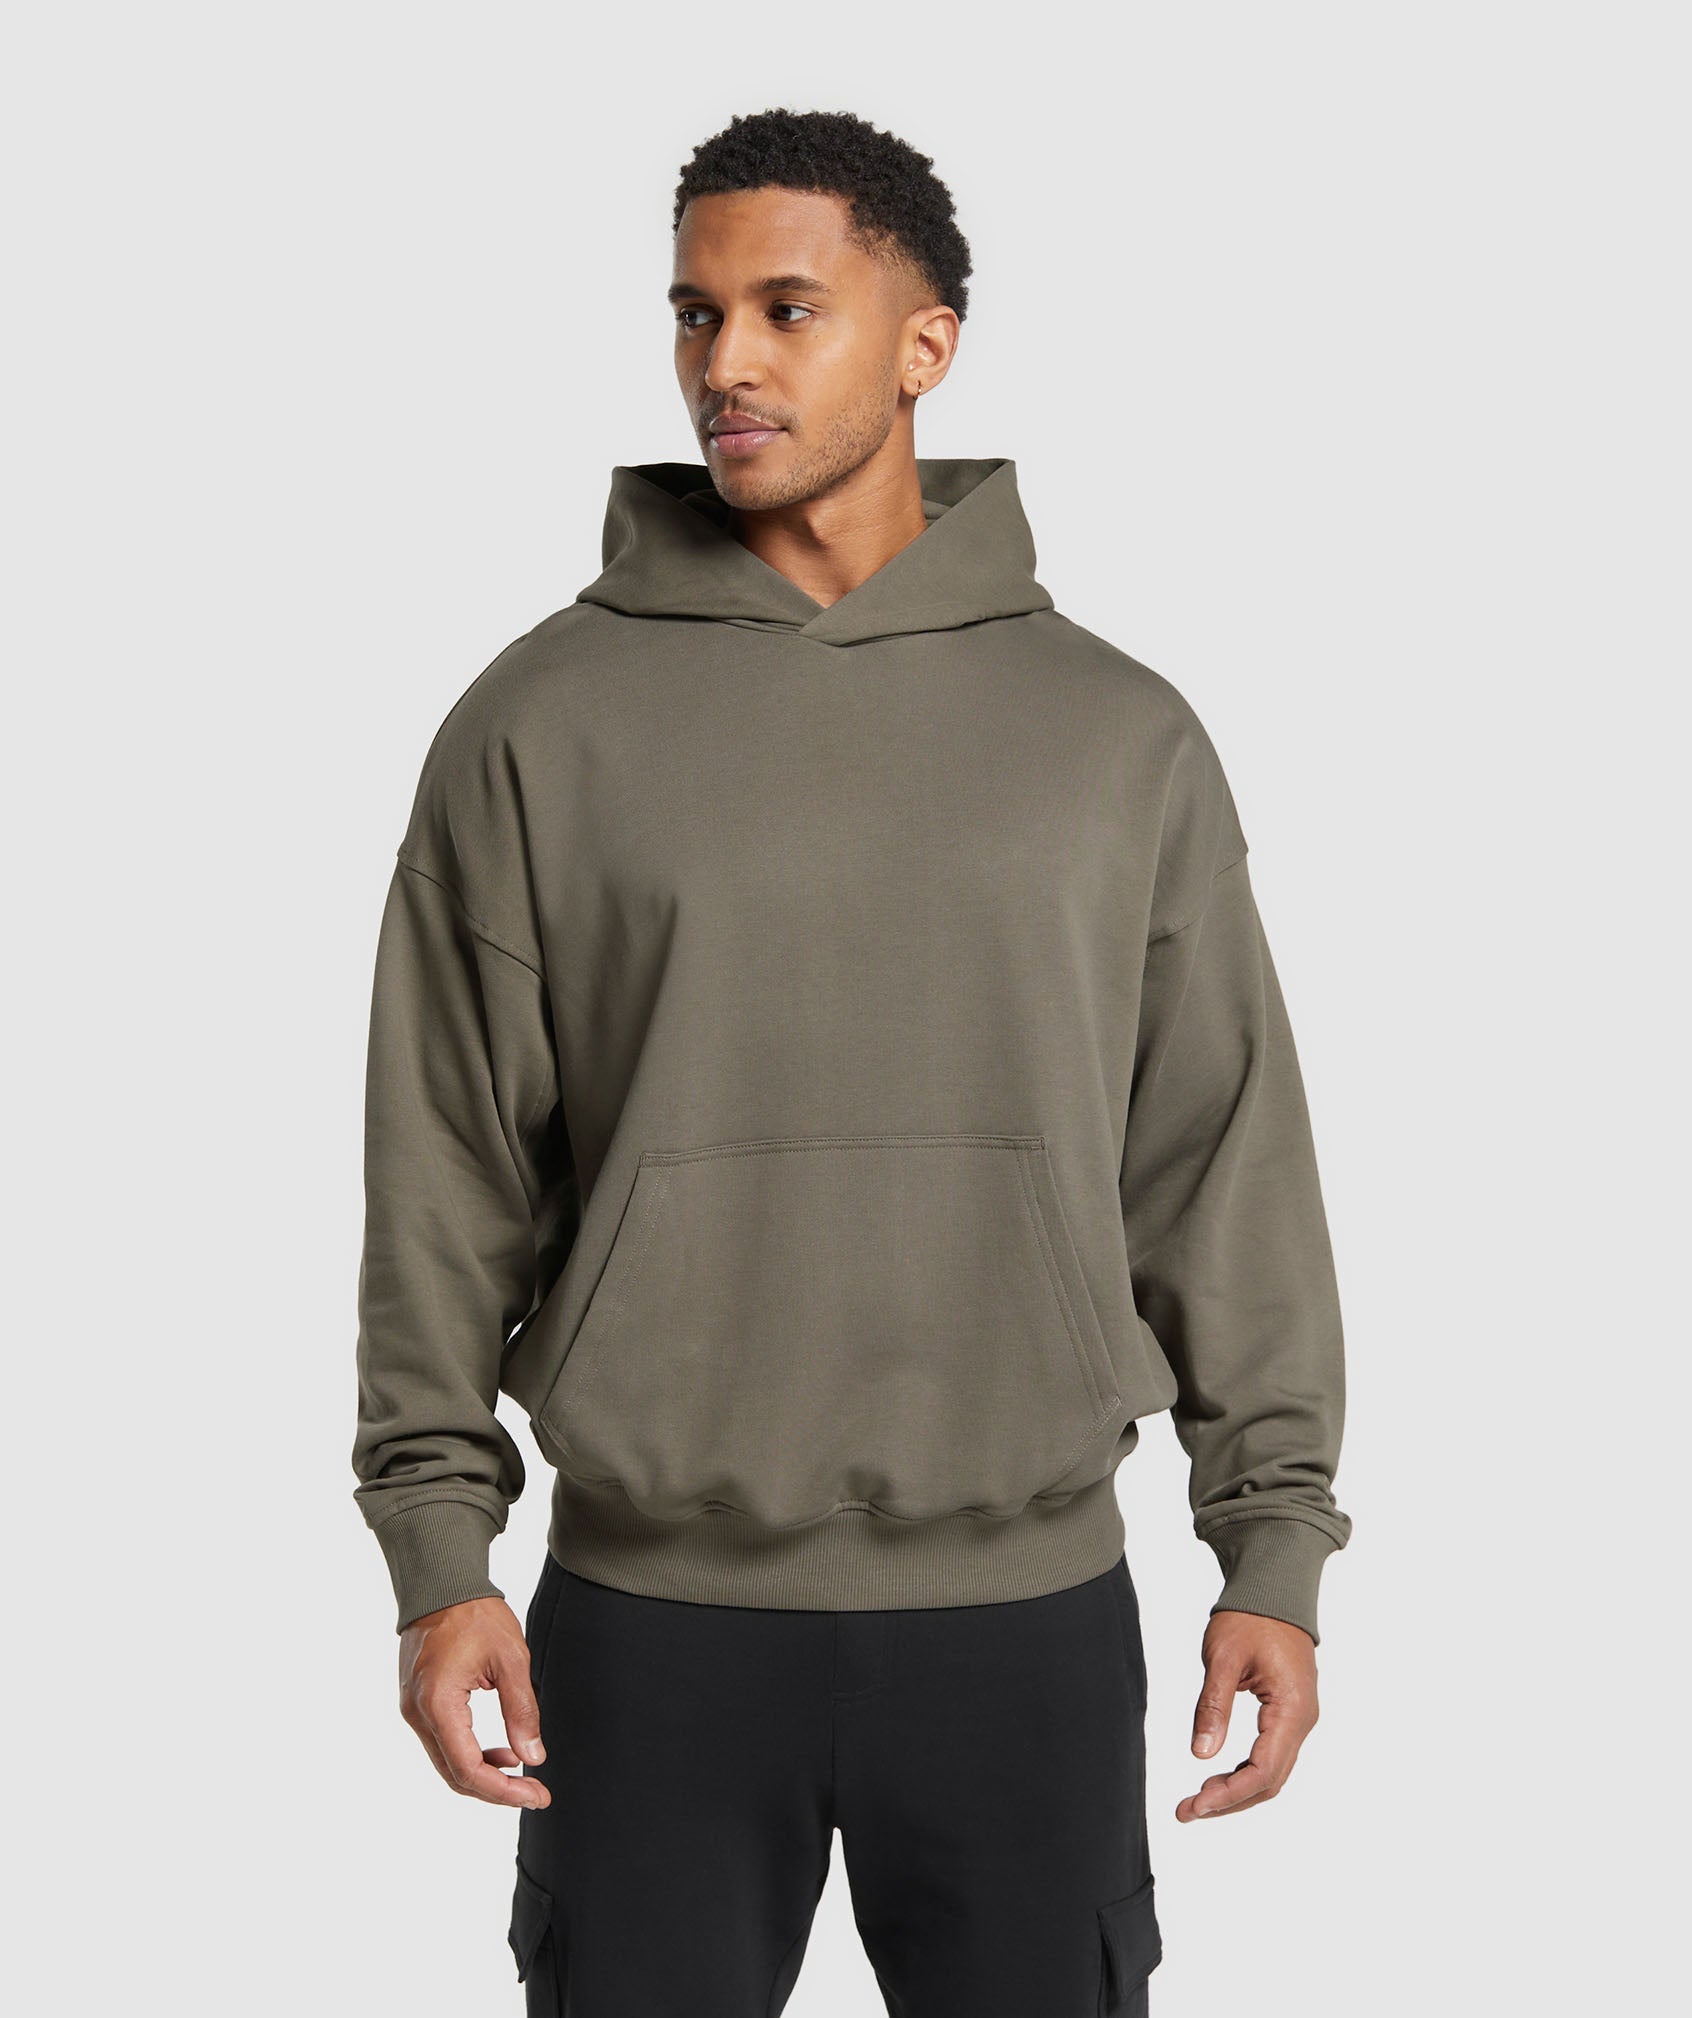 Rest Day Essentials Hoodie in Camo Brown - view 1